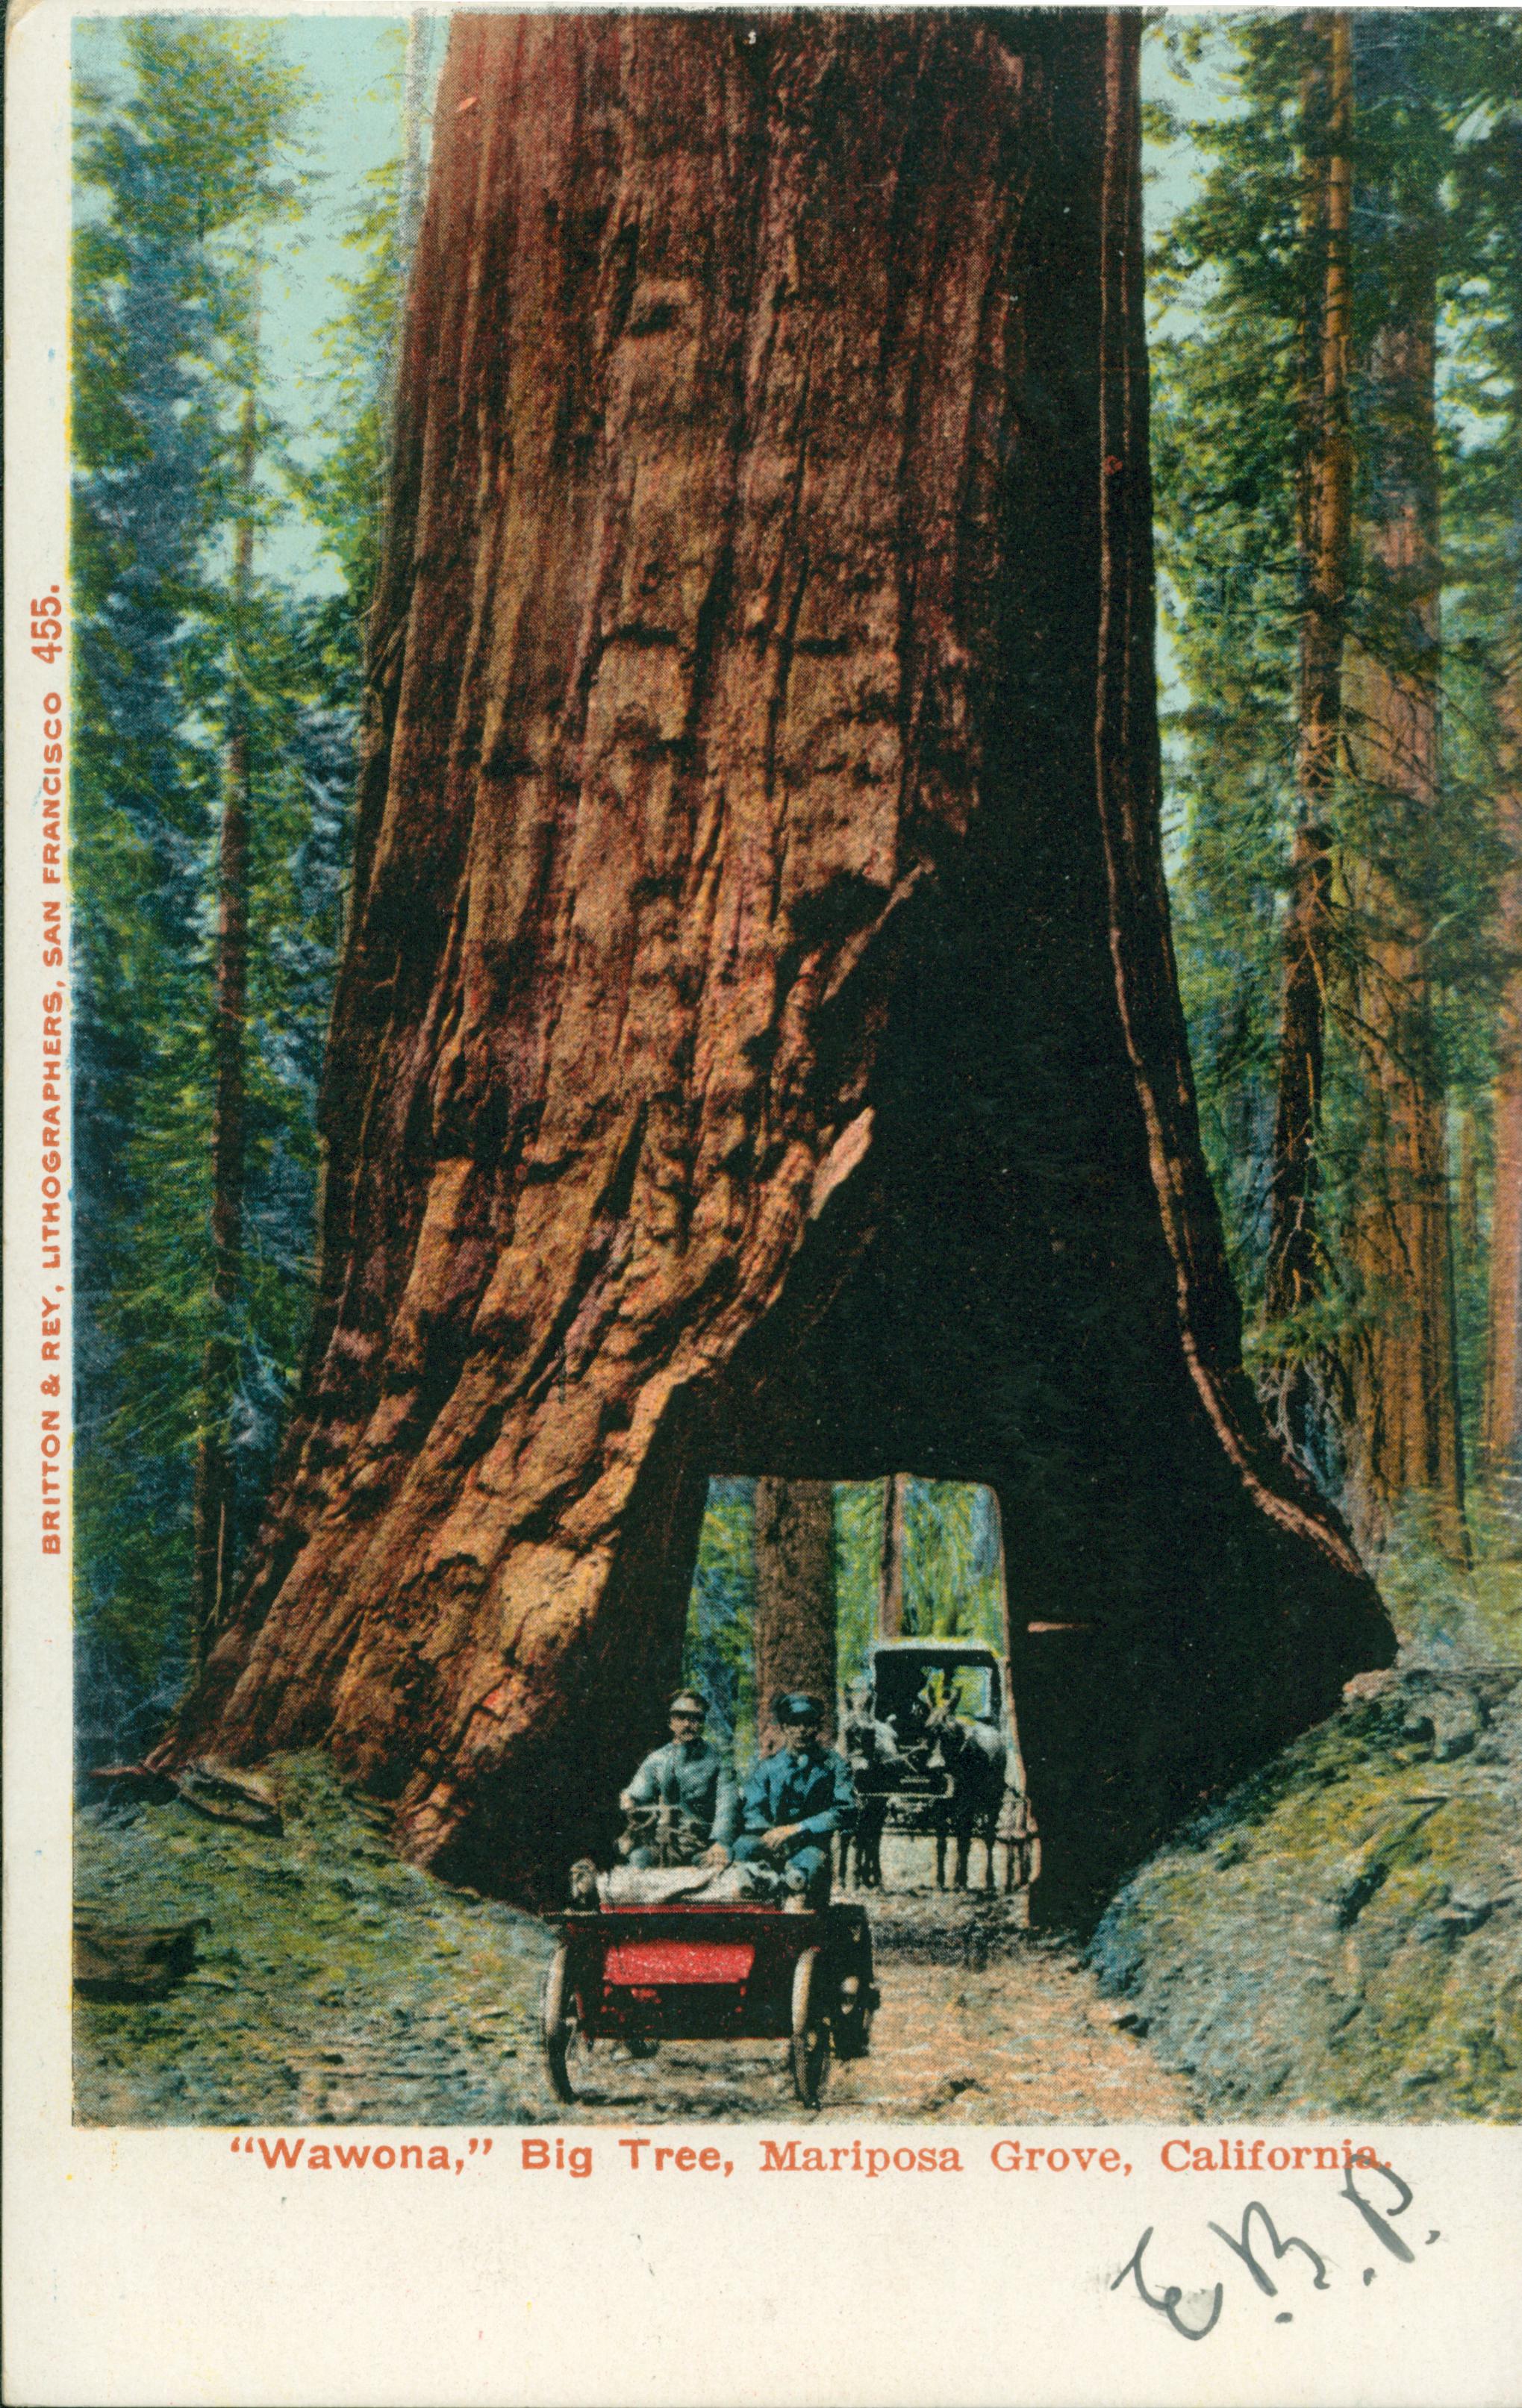 Shows a car with two people driving through Wawona tree while a carriage waits its turn.